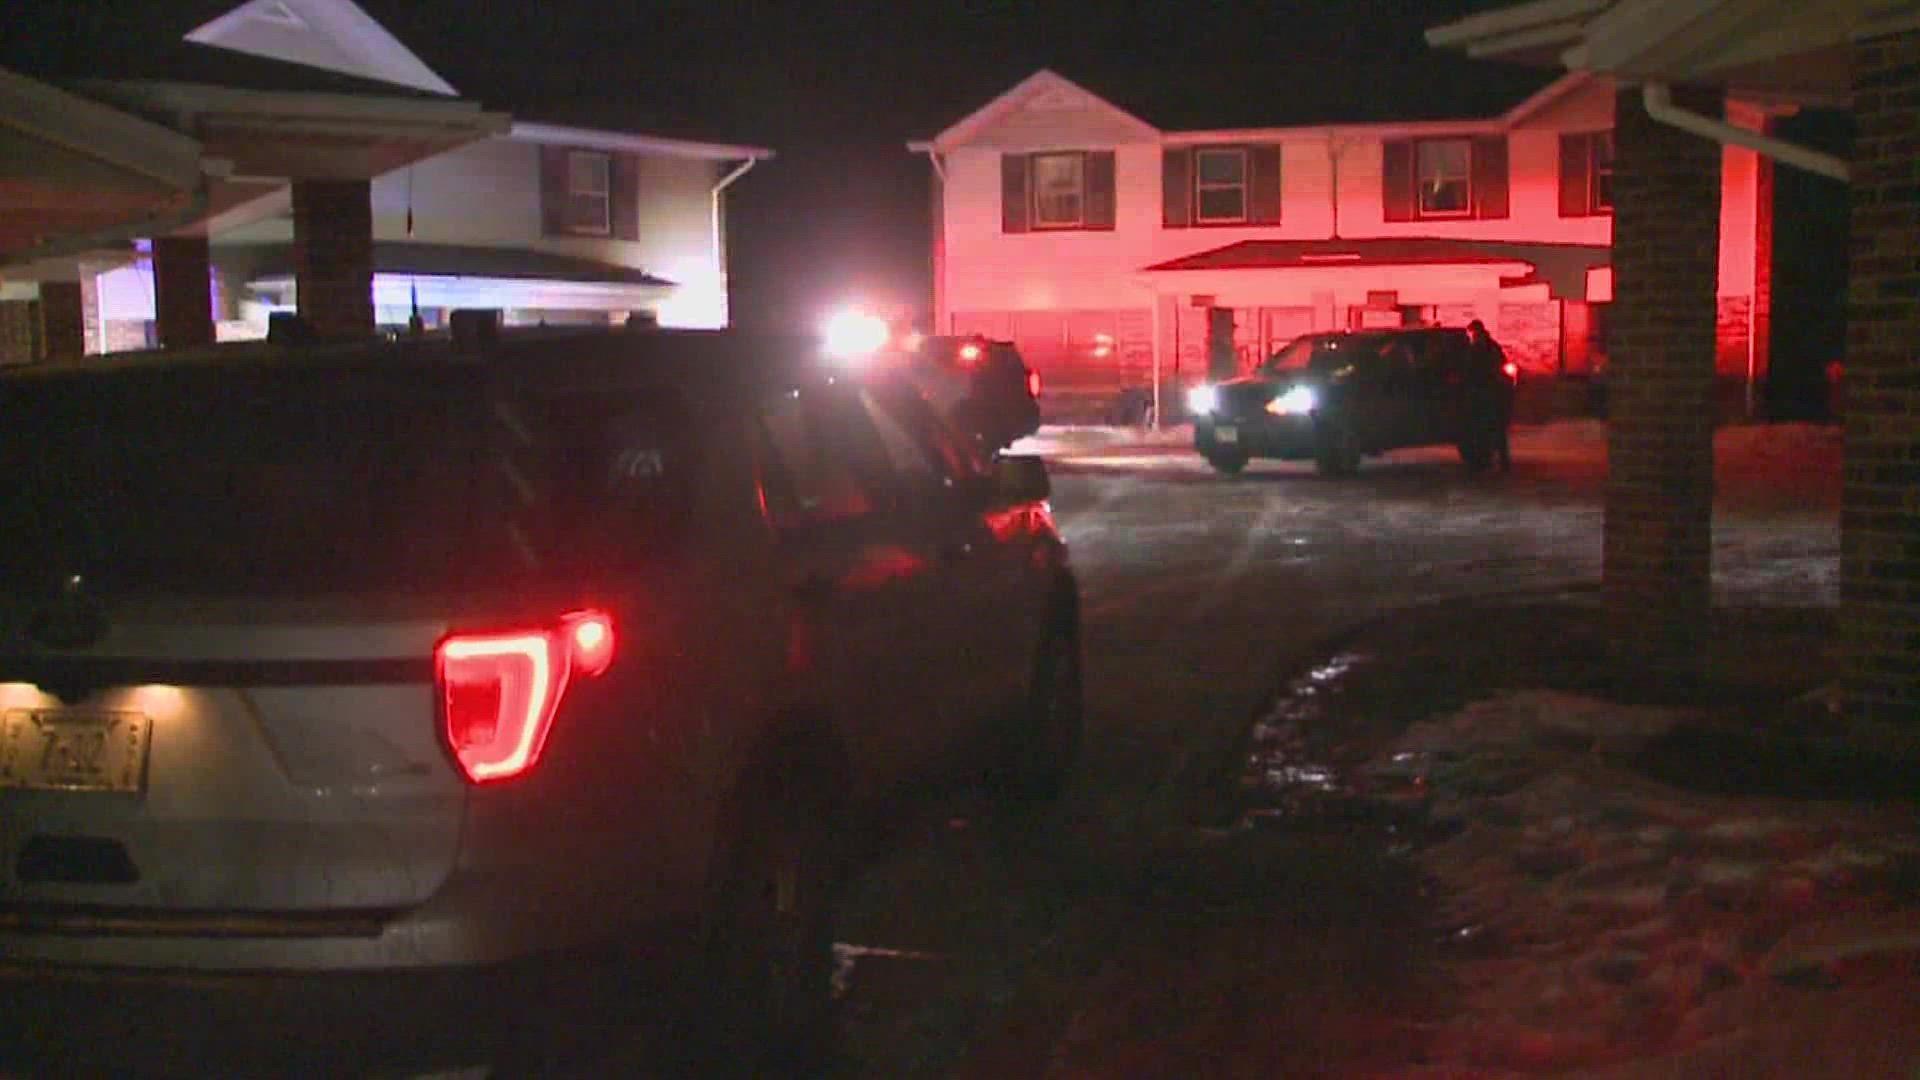 A man was found dead and two other people were rushed to the hospital after a shooting early Saturday morning.